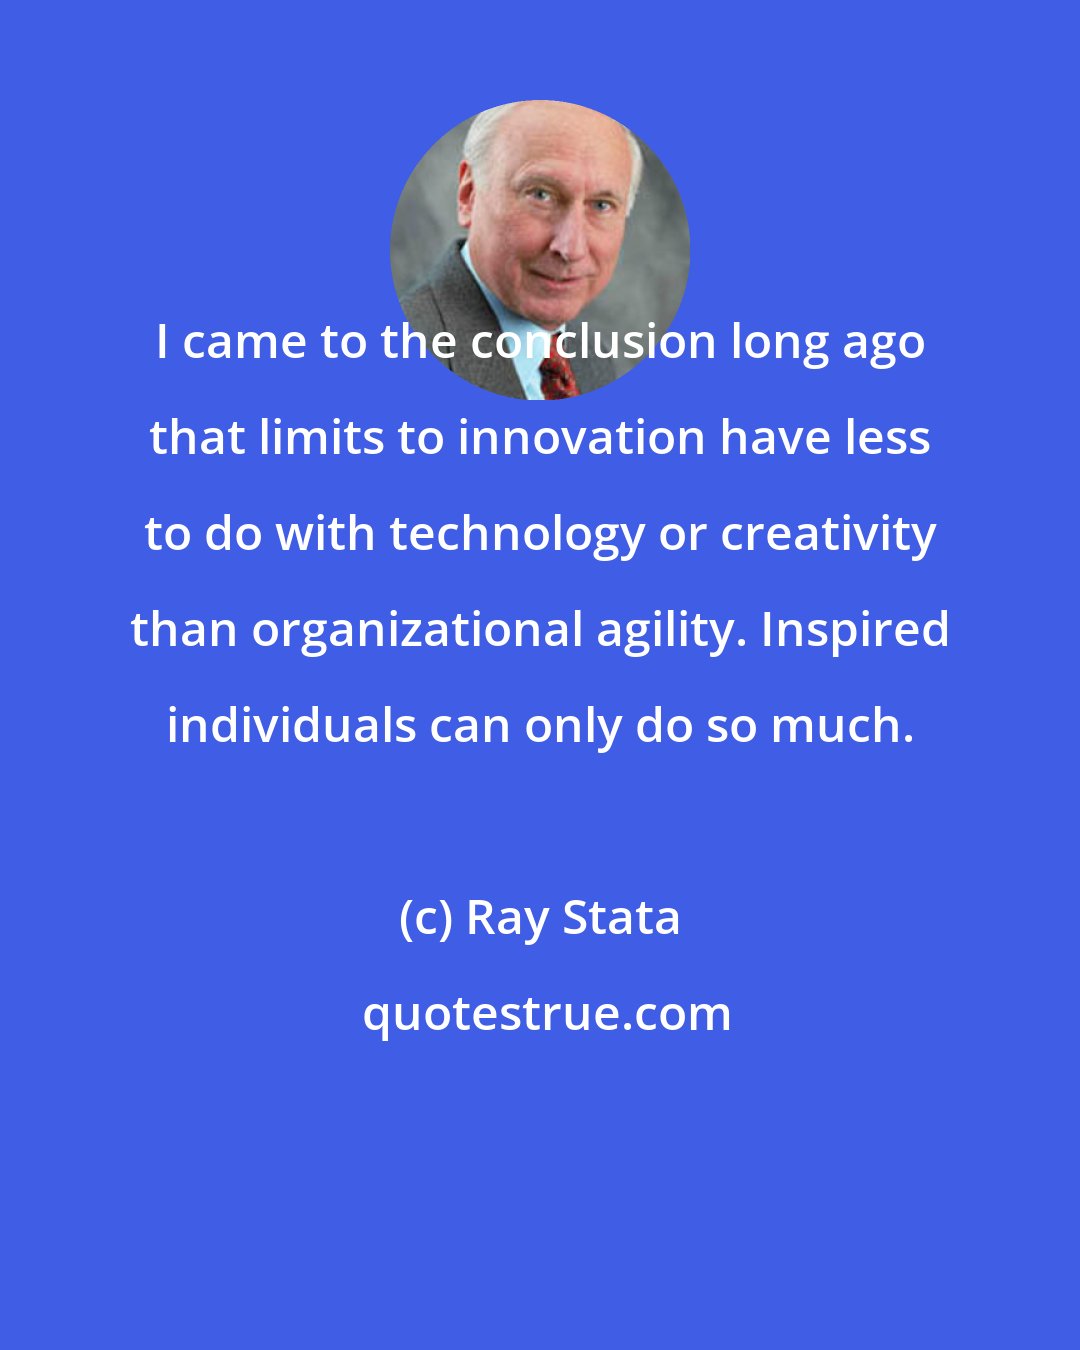 Ray Stata: I came to the conclusion long ago that limits to innovation have less to do with technology or creativity than organizational agility. Inspired individuals can only do so much.